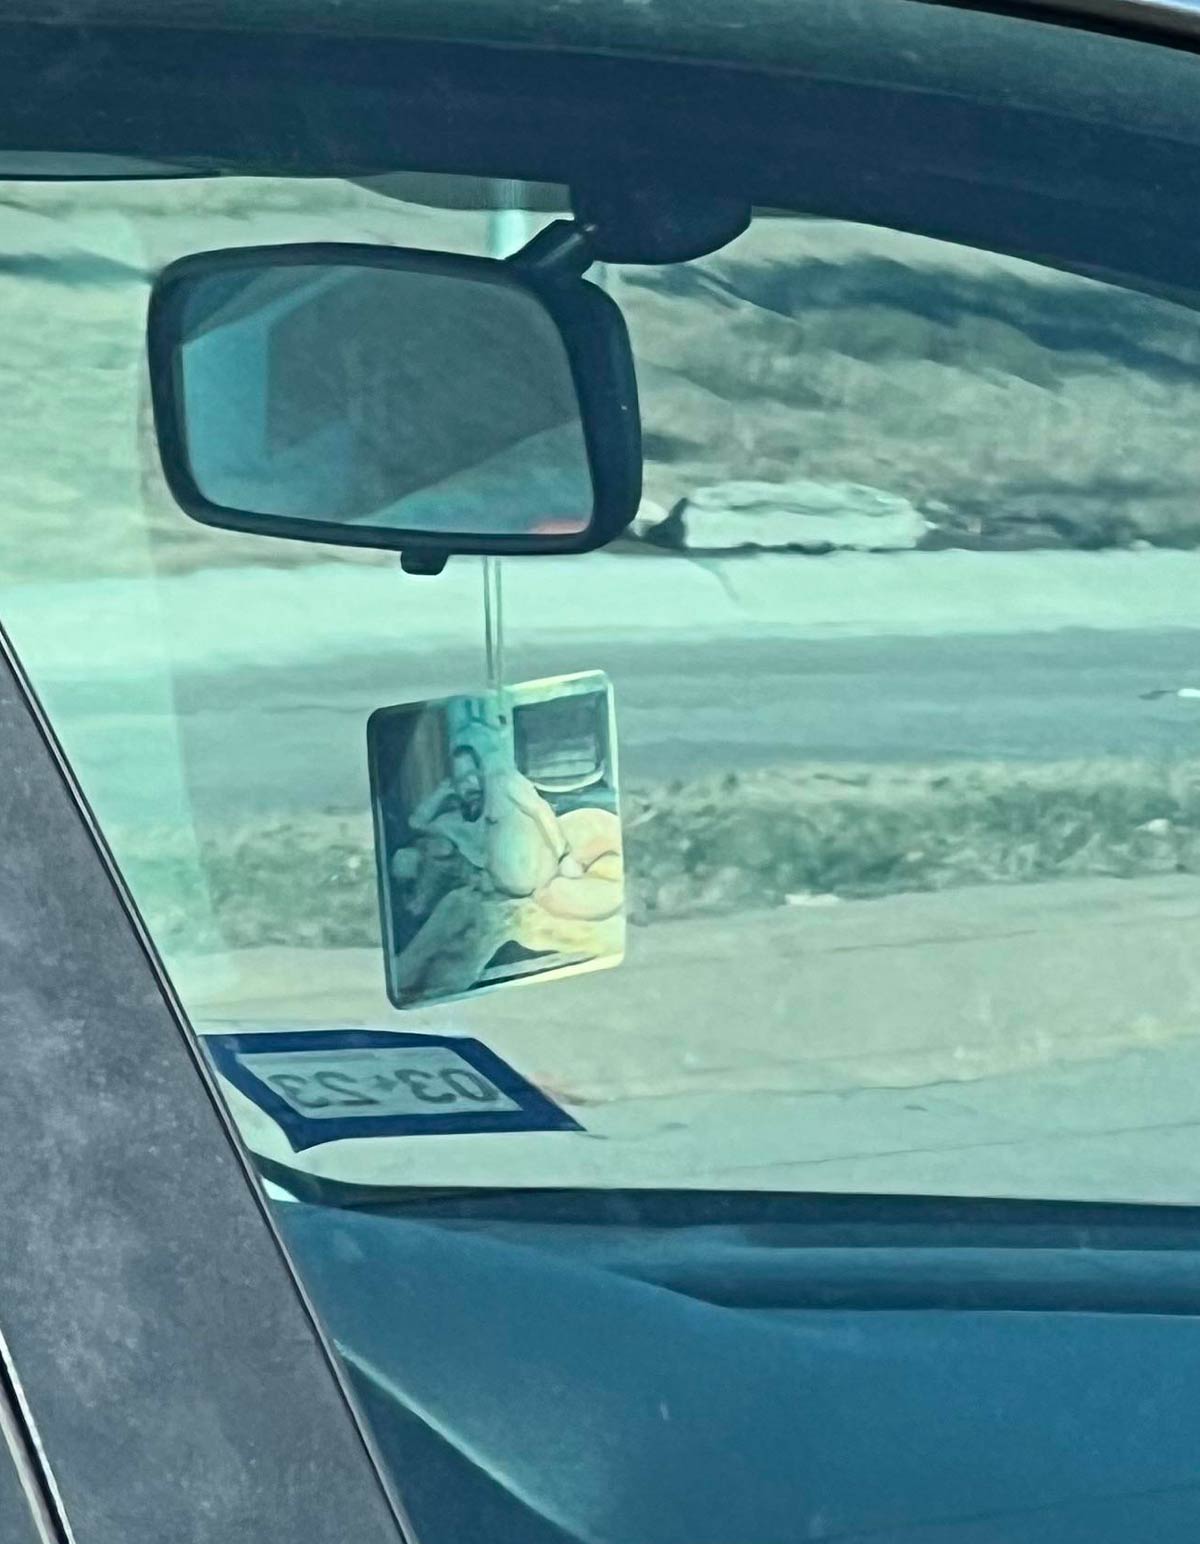 Air freshener in the car next to me